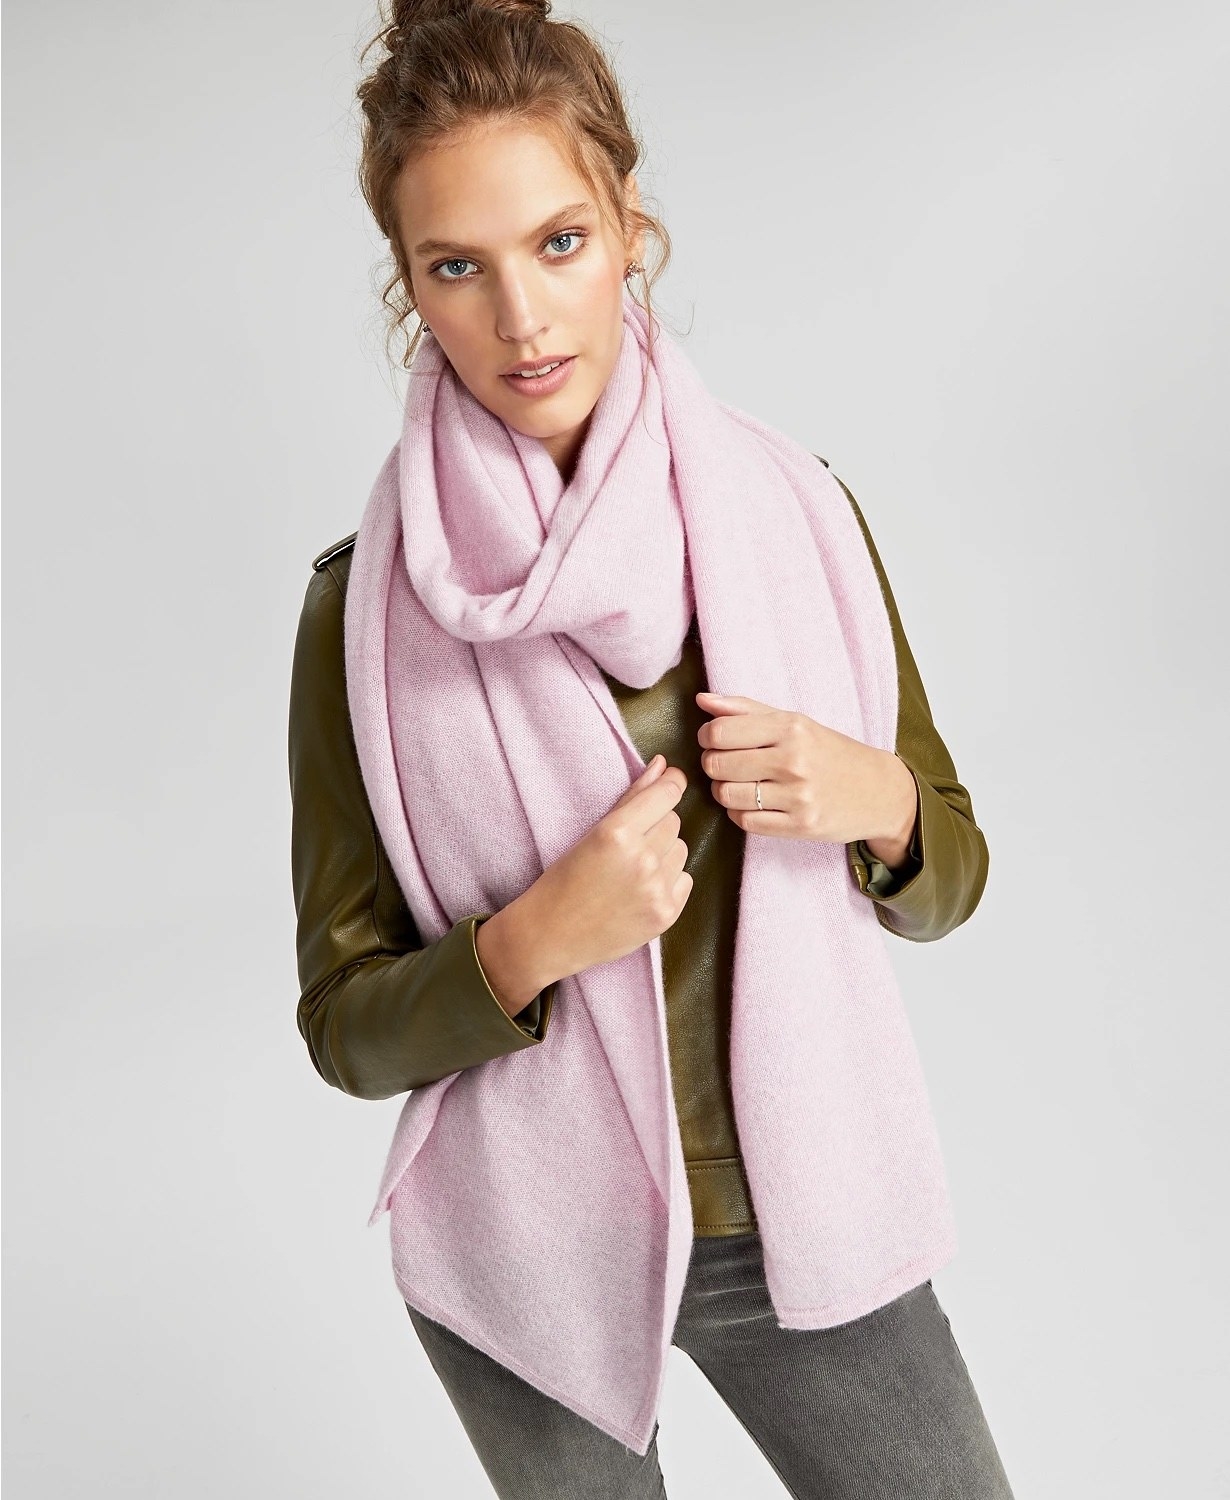 Model wearing oversized pink scarf with grey jeans and green shirt